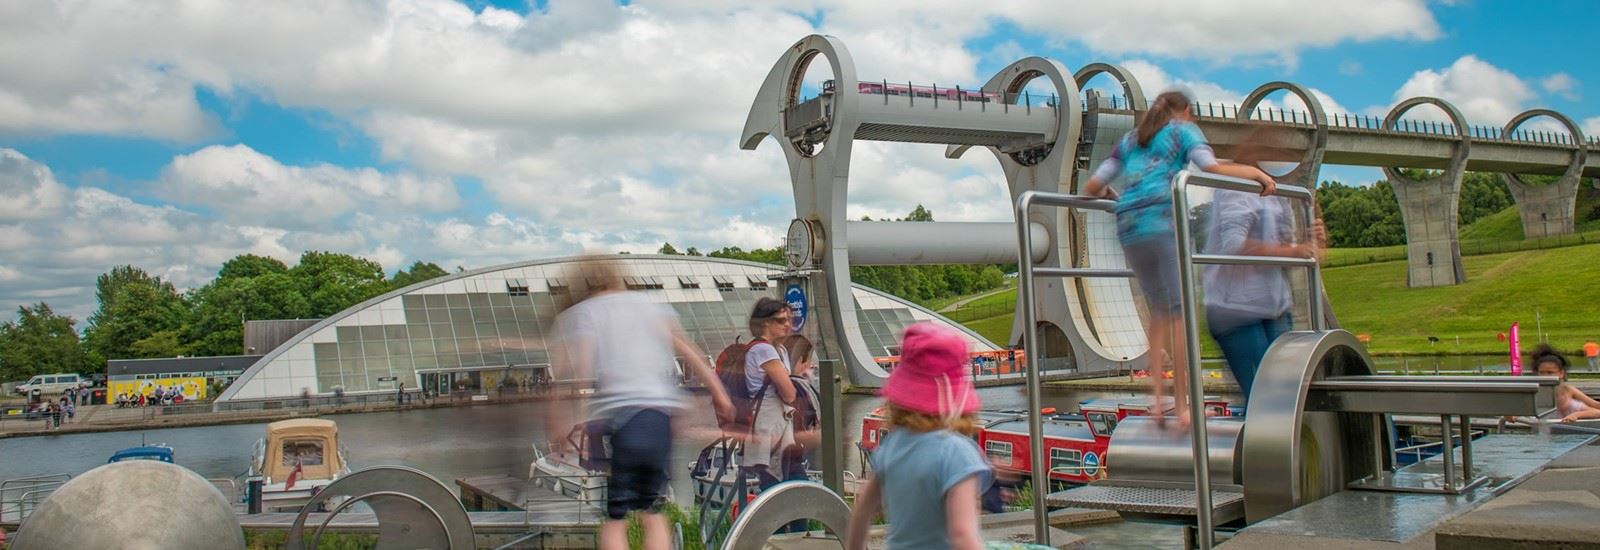 Falkirk wheel family accessible 